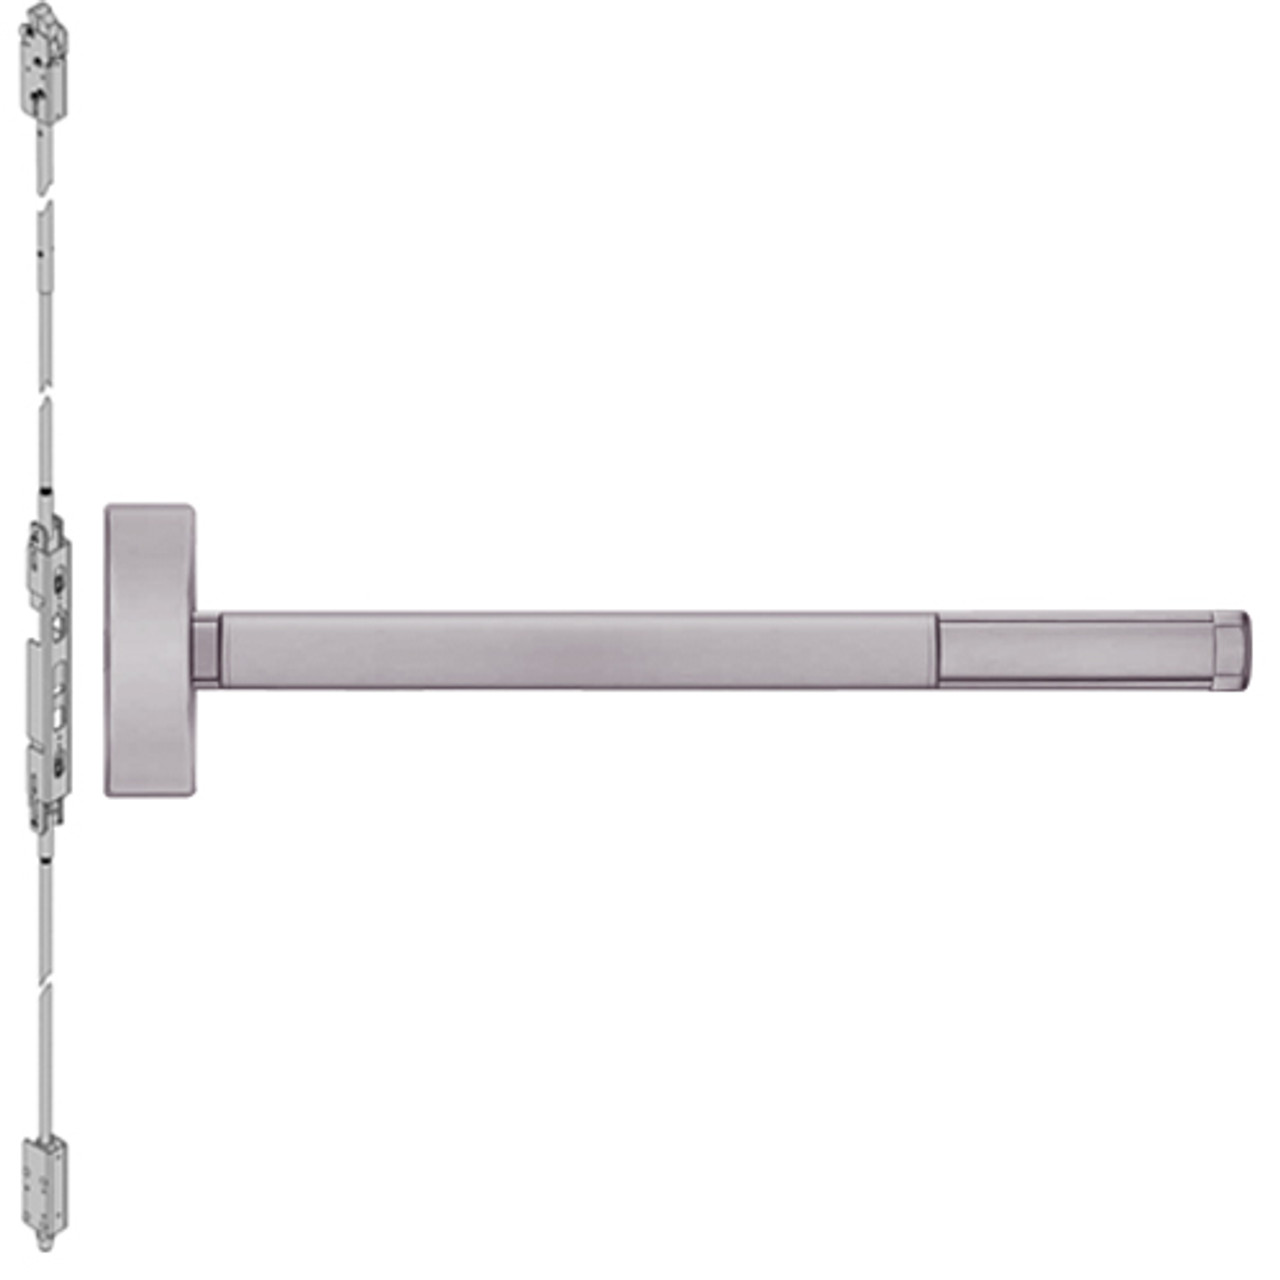 FL2801LBR-630-48 PHI 2800 Series Fire Rated Concealed Vertical Rod Exit Device Prepped for Cover Plate in Satin Stainless Steel Finish